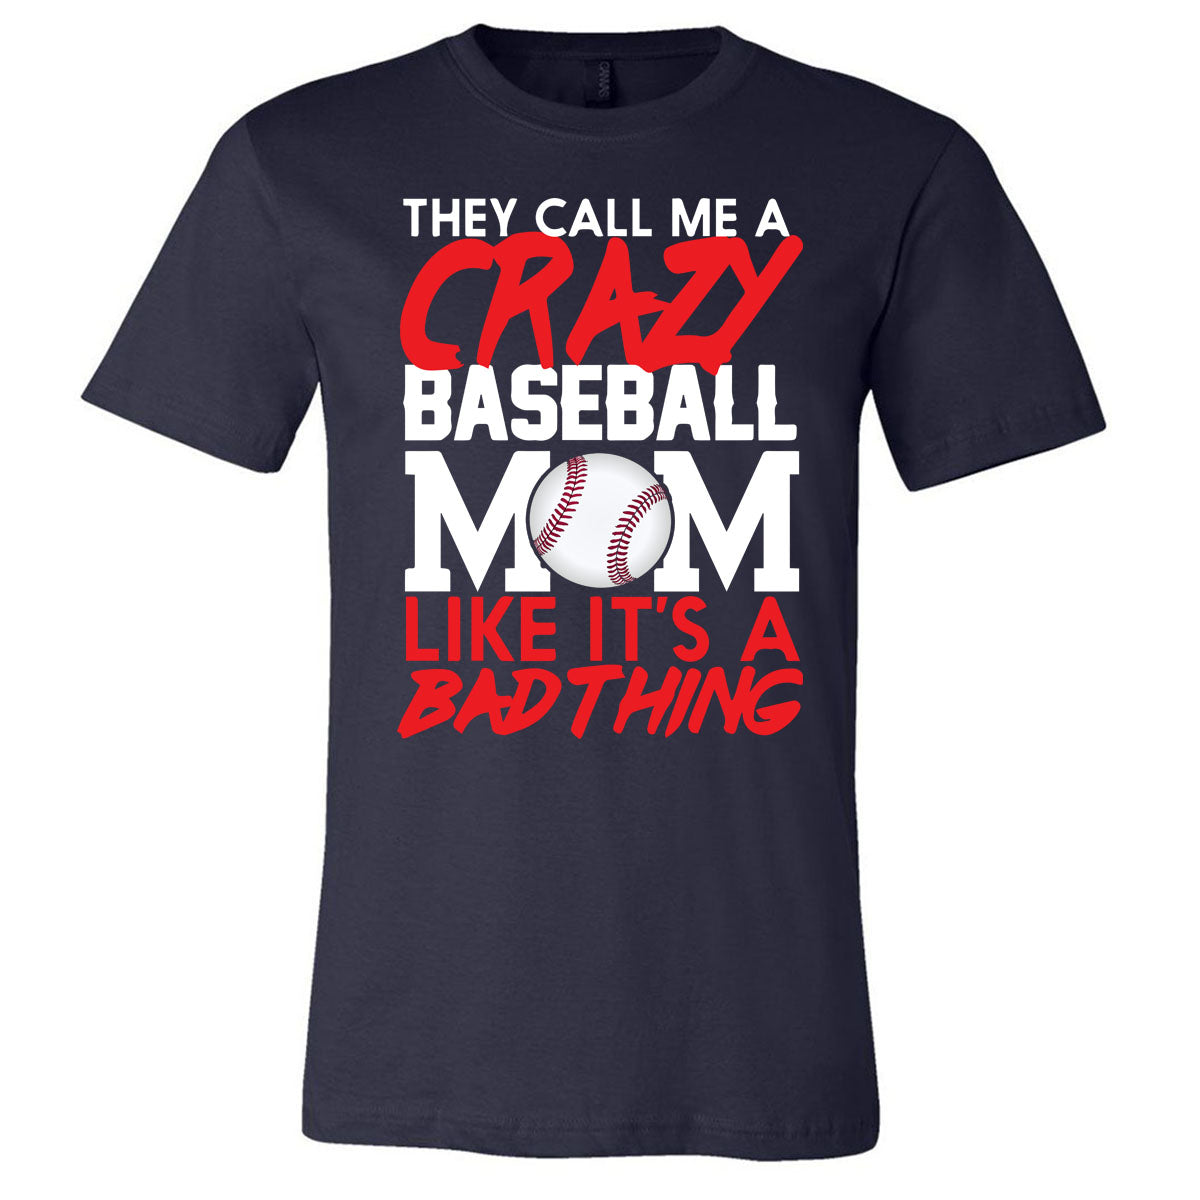 They Call Me Crazy Baseball Mom - Short Sleeve Tee - Southern Grace Creations